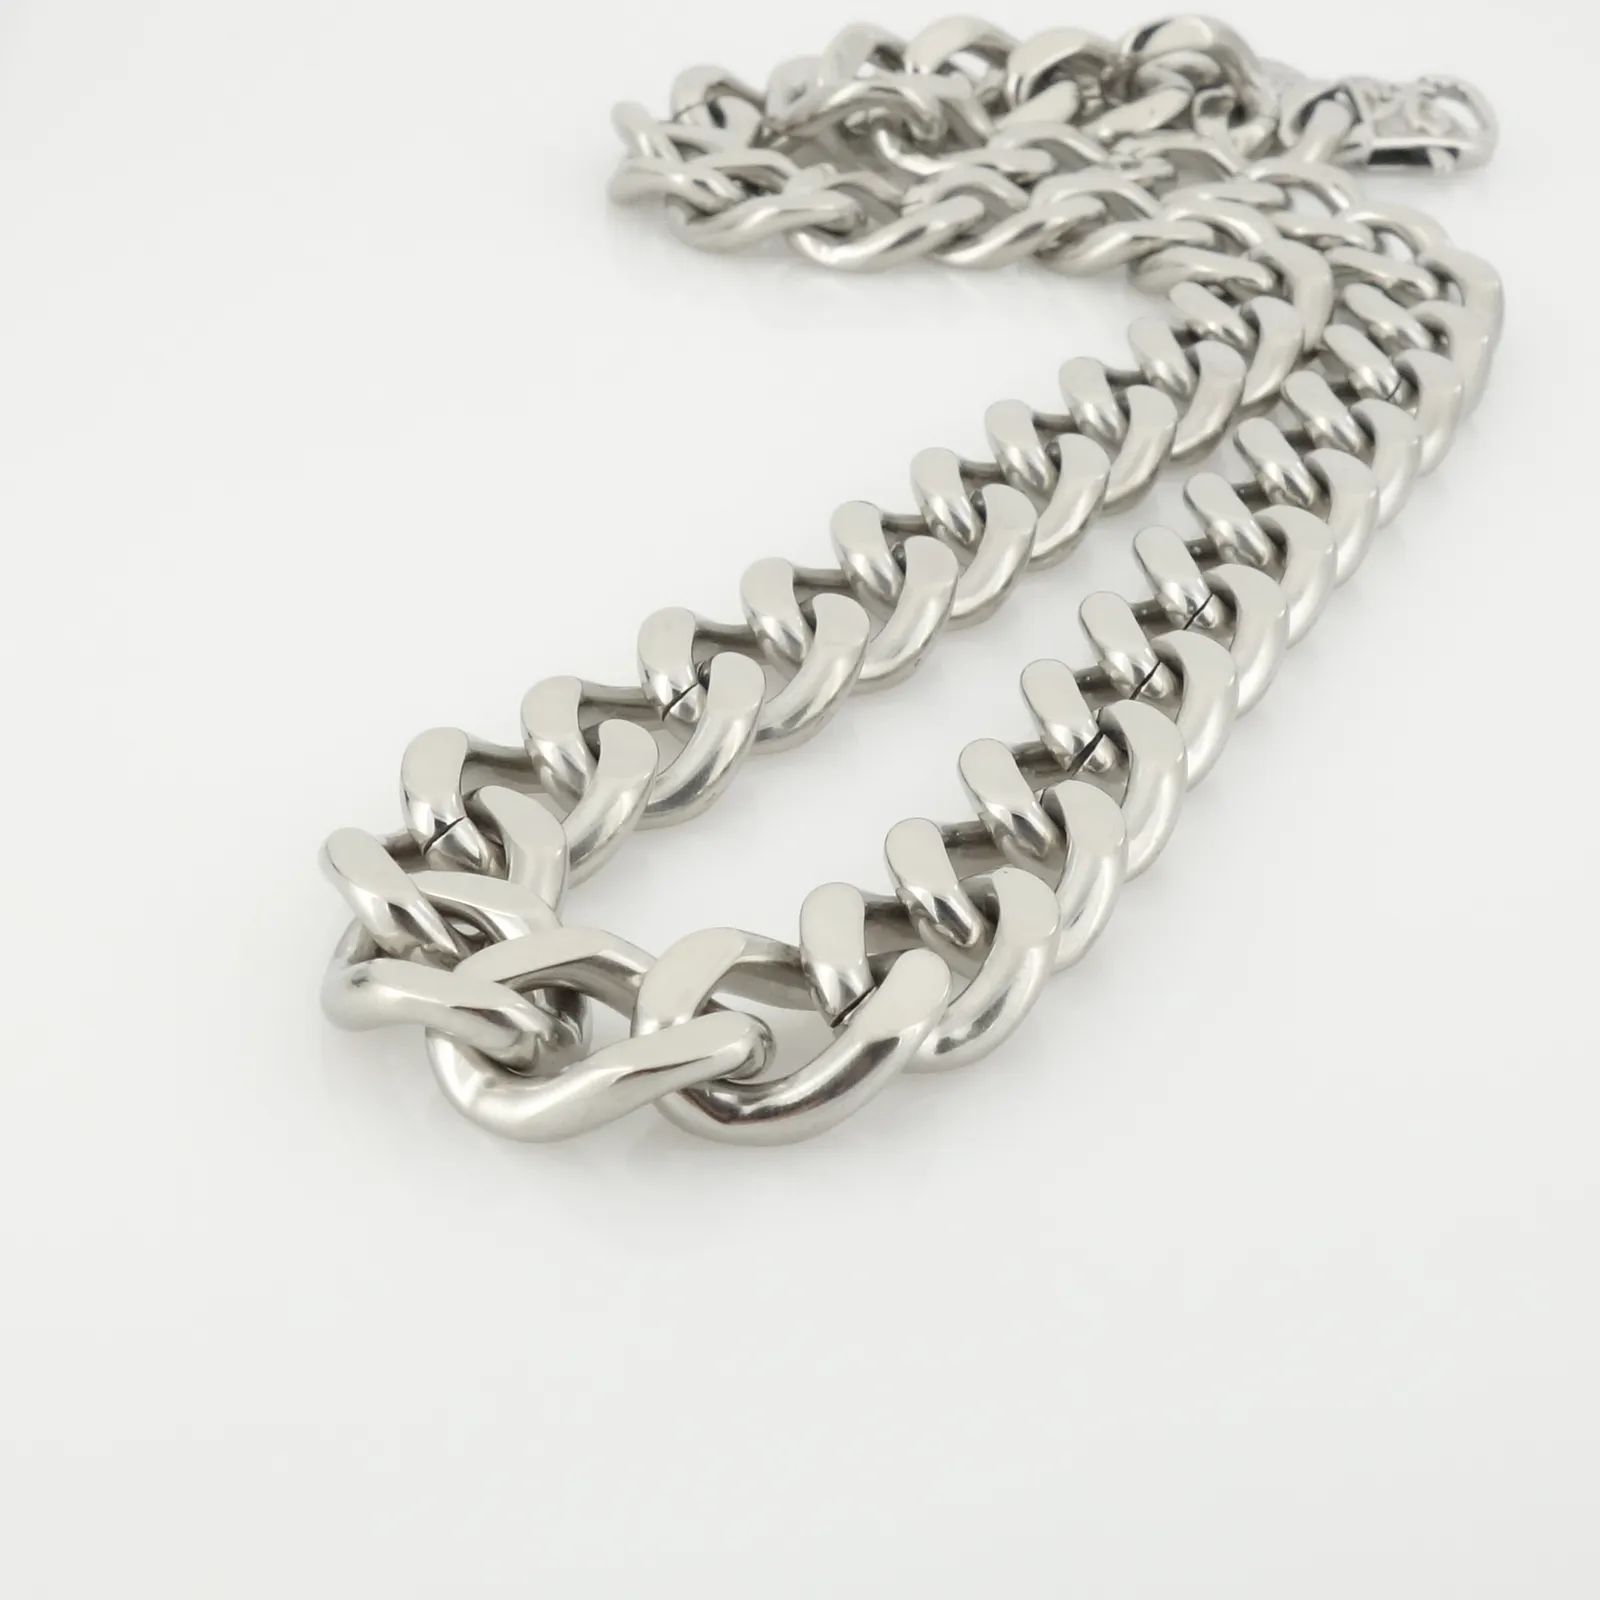 150g charm shiny silver men's heavy huge Cuban Chain Stainless steel 14mm Chain Necklace 23.6''for gifts